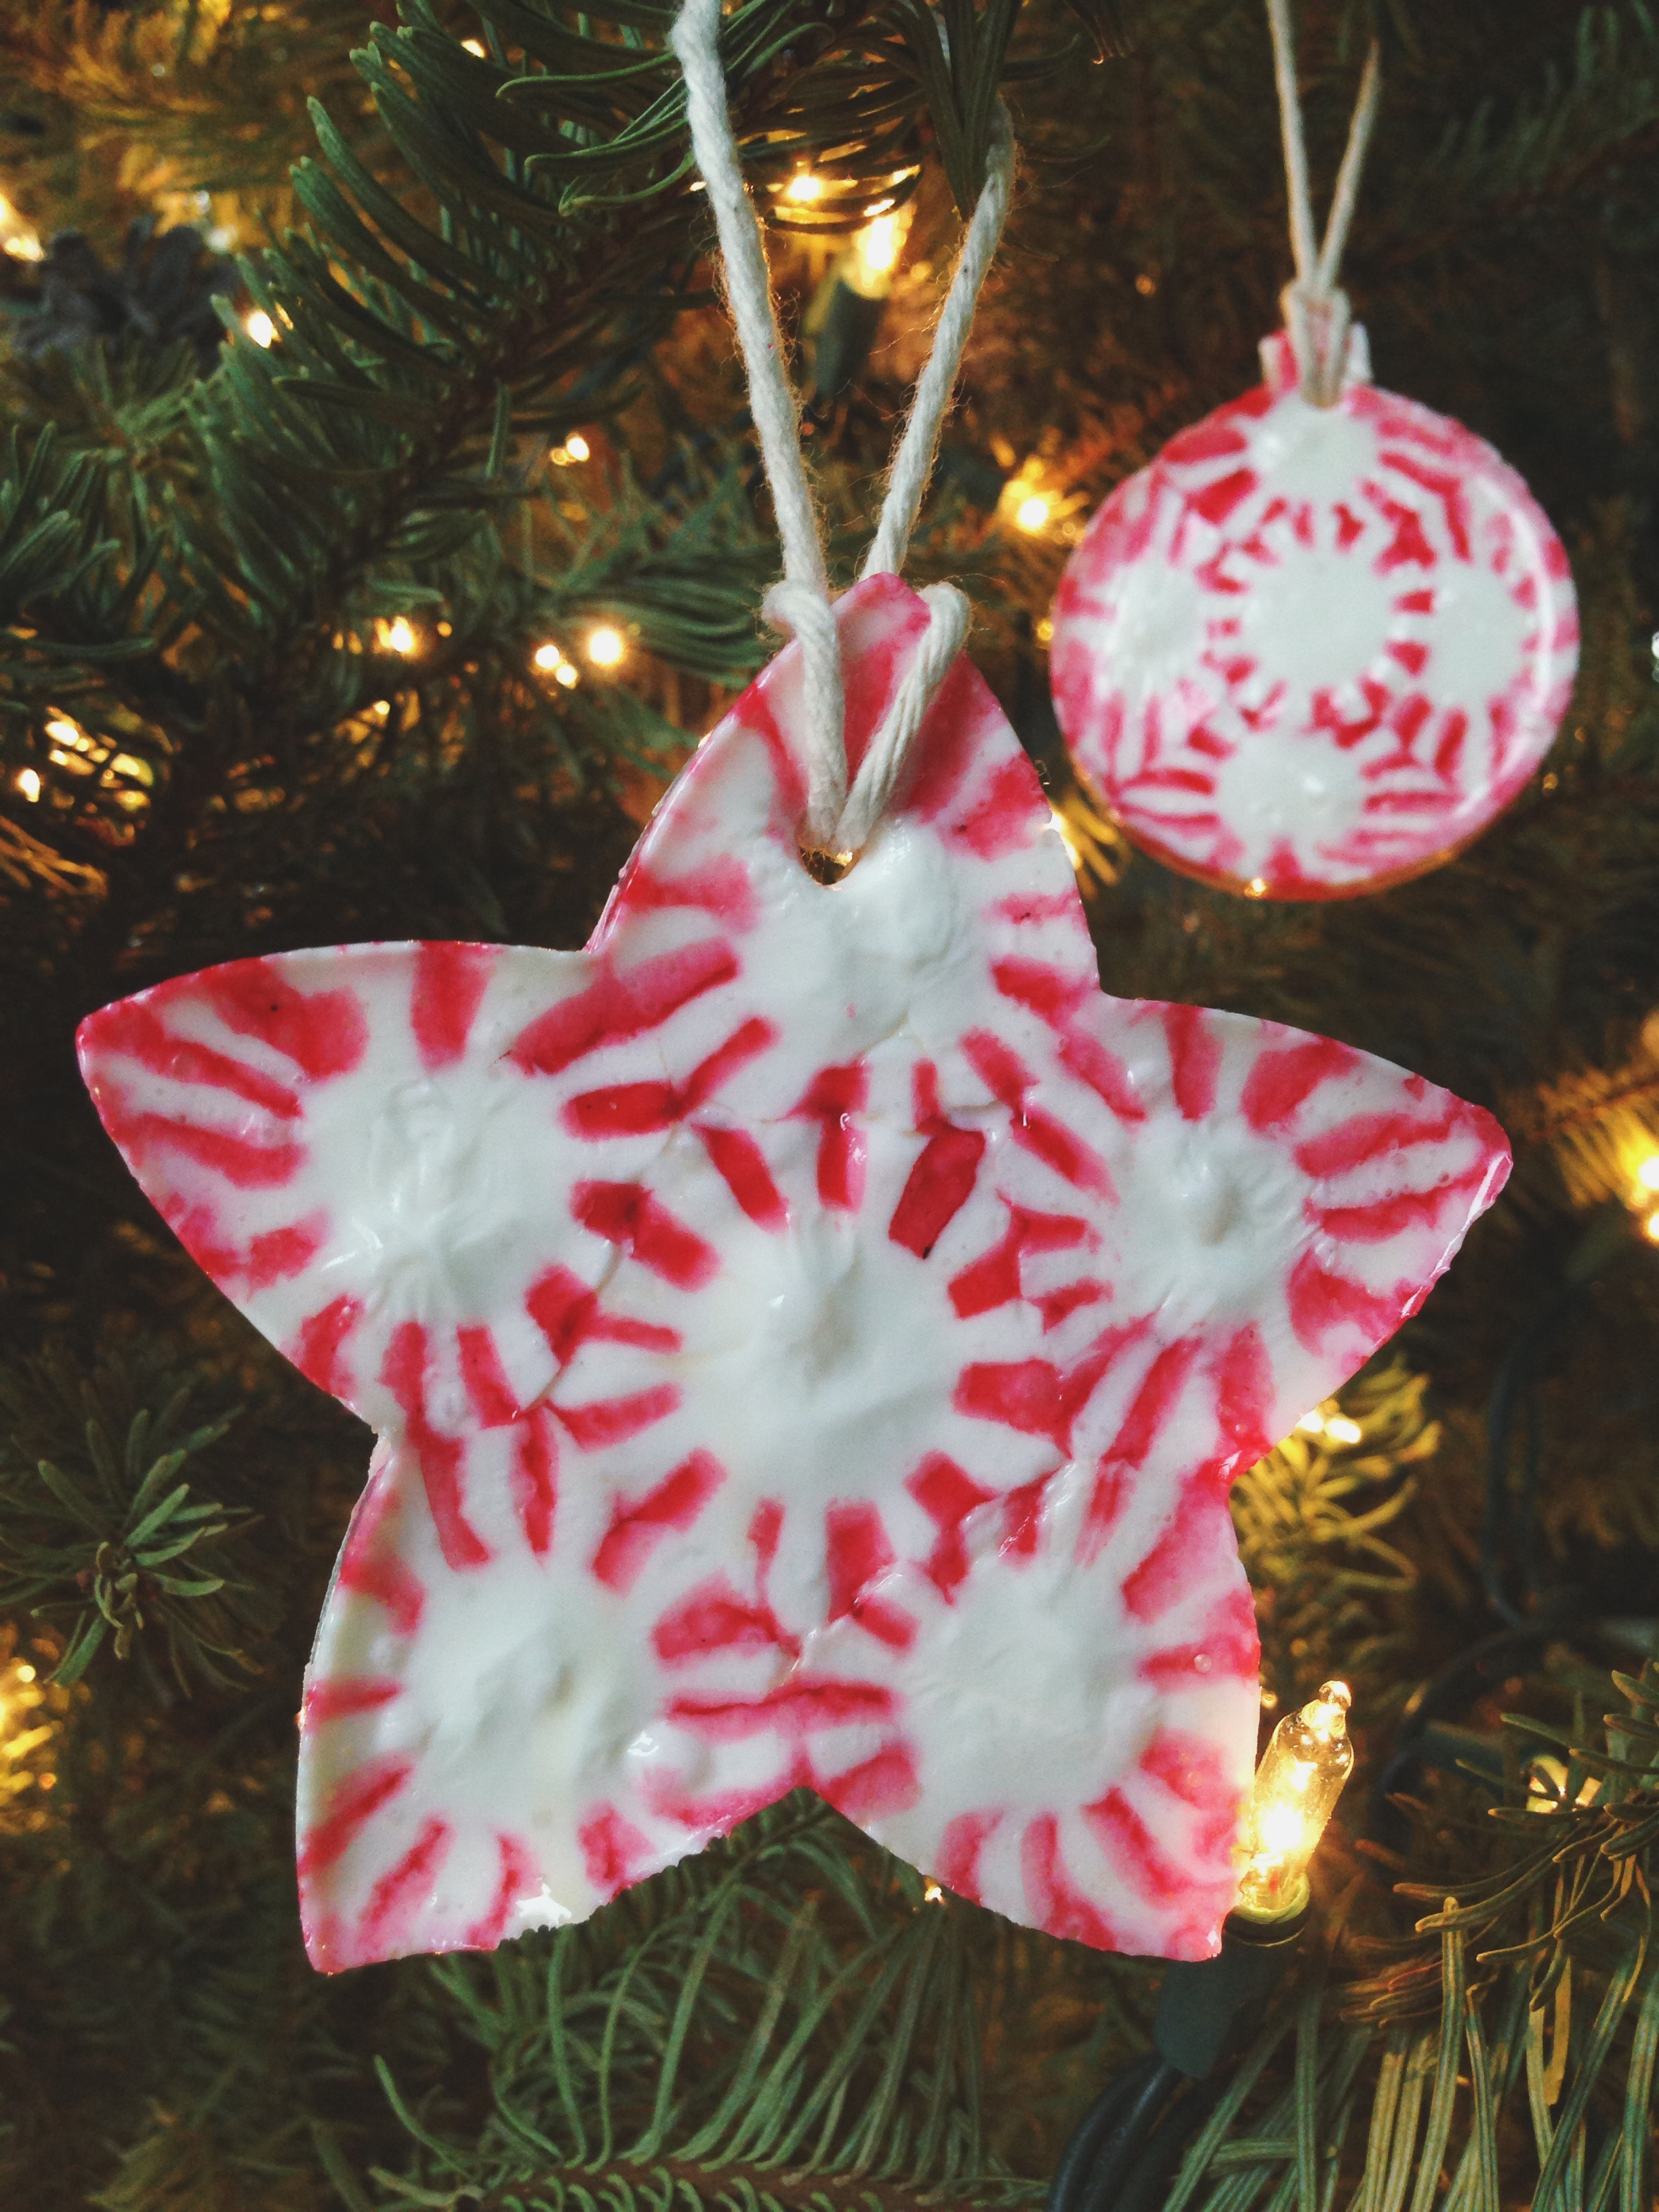 Candy Christmas Tree Ornaments
 Peppermint Candy Christmas Ornaments